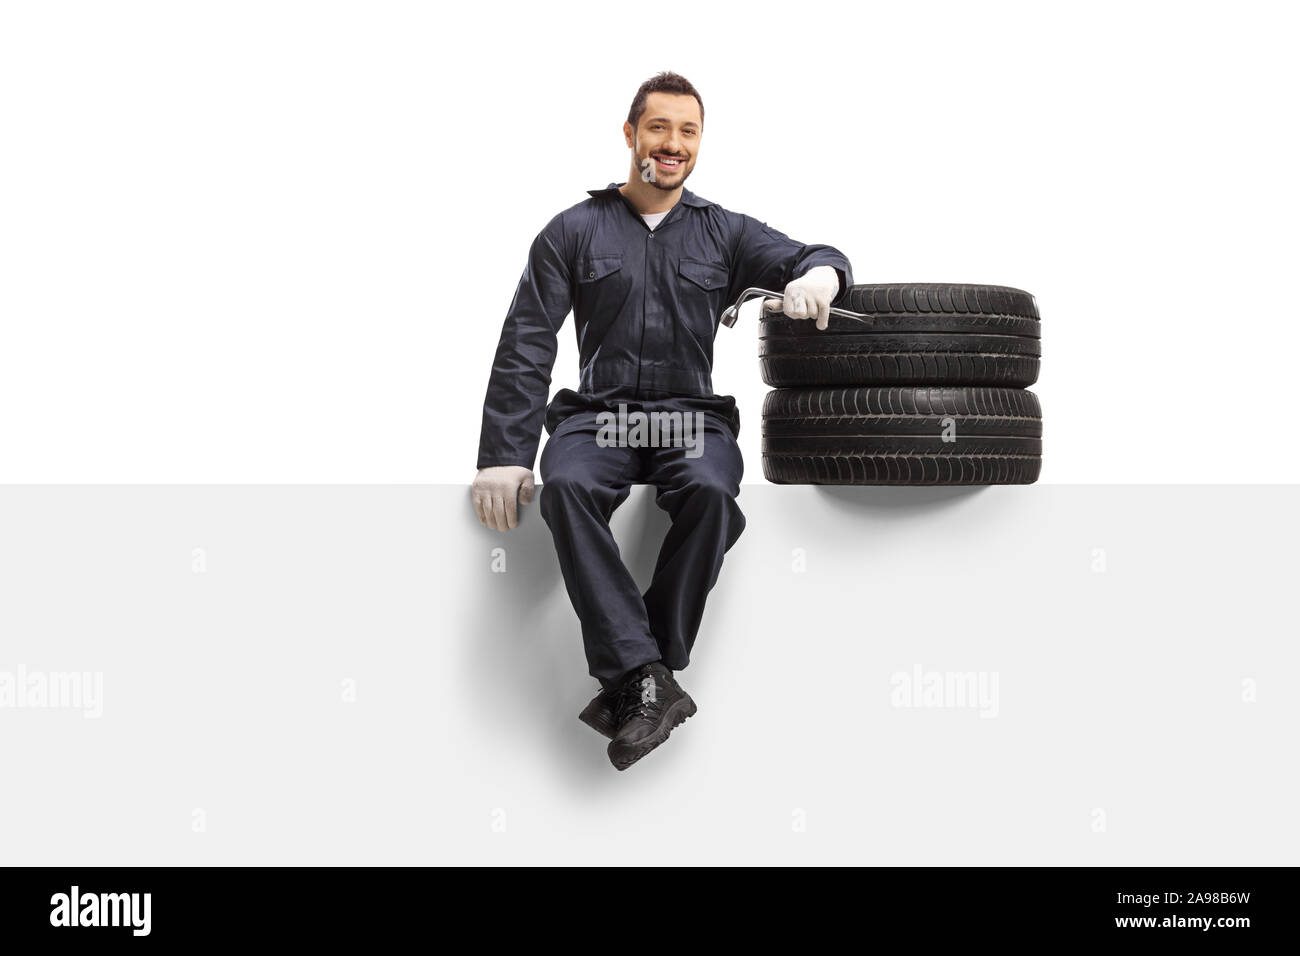 Auto mechanic sitting on a panel with tires and a wrench isolated on white background Stock Photo